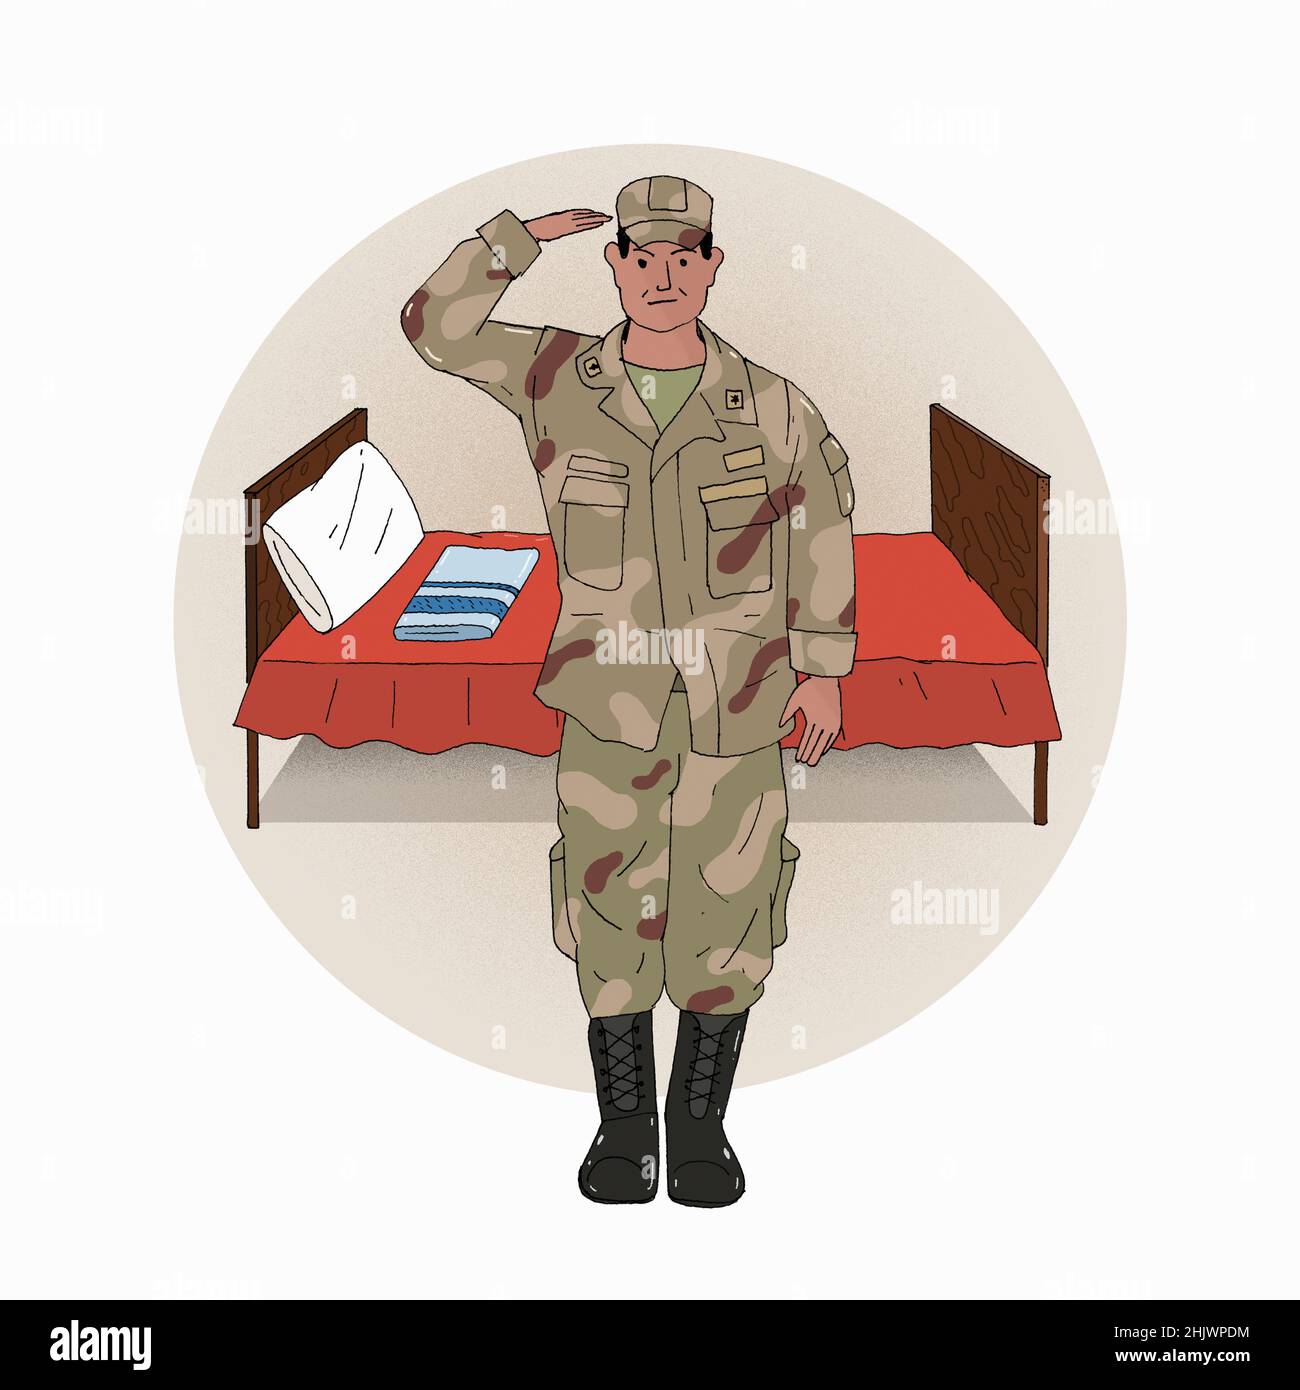 Soldier saluting standing beside bed Stock Photo